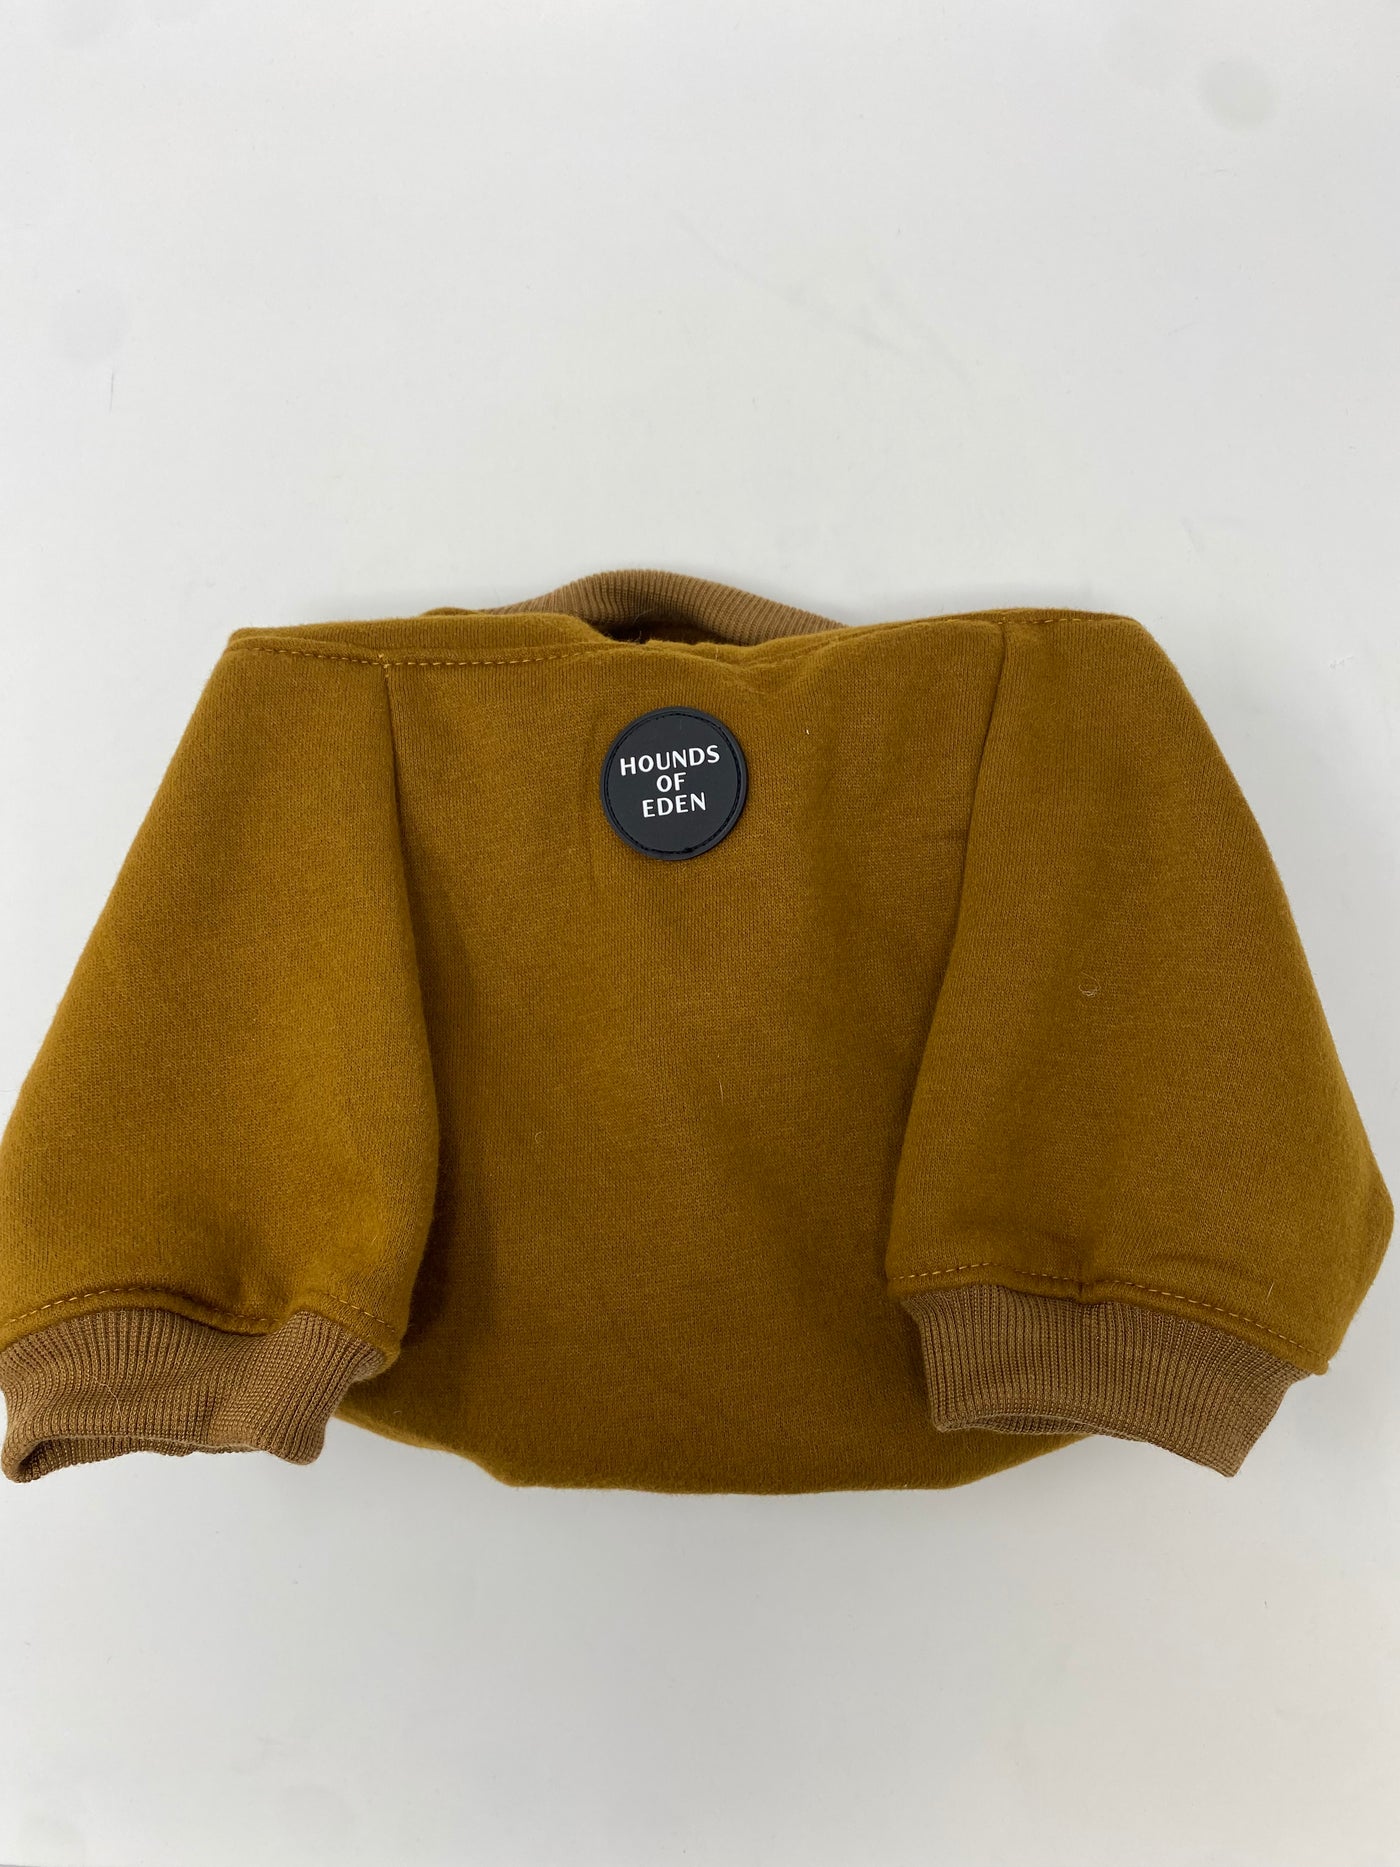 Outlet - XL DOG HOODIE, NO POPPER - BROWN - 0045